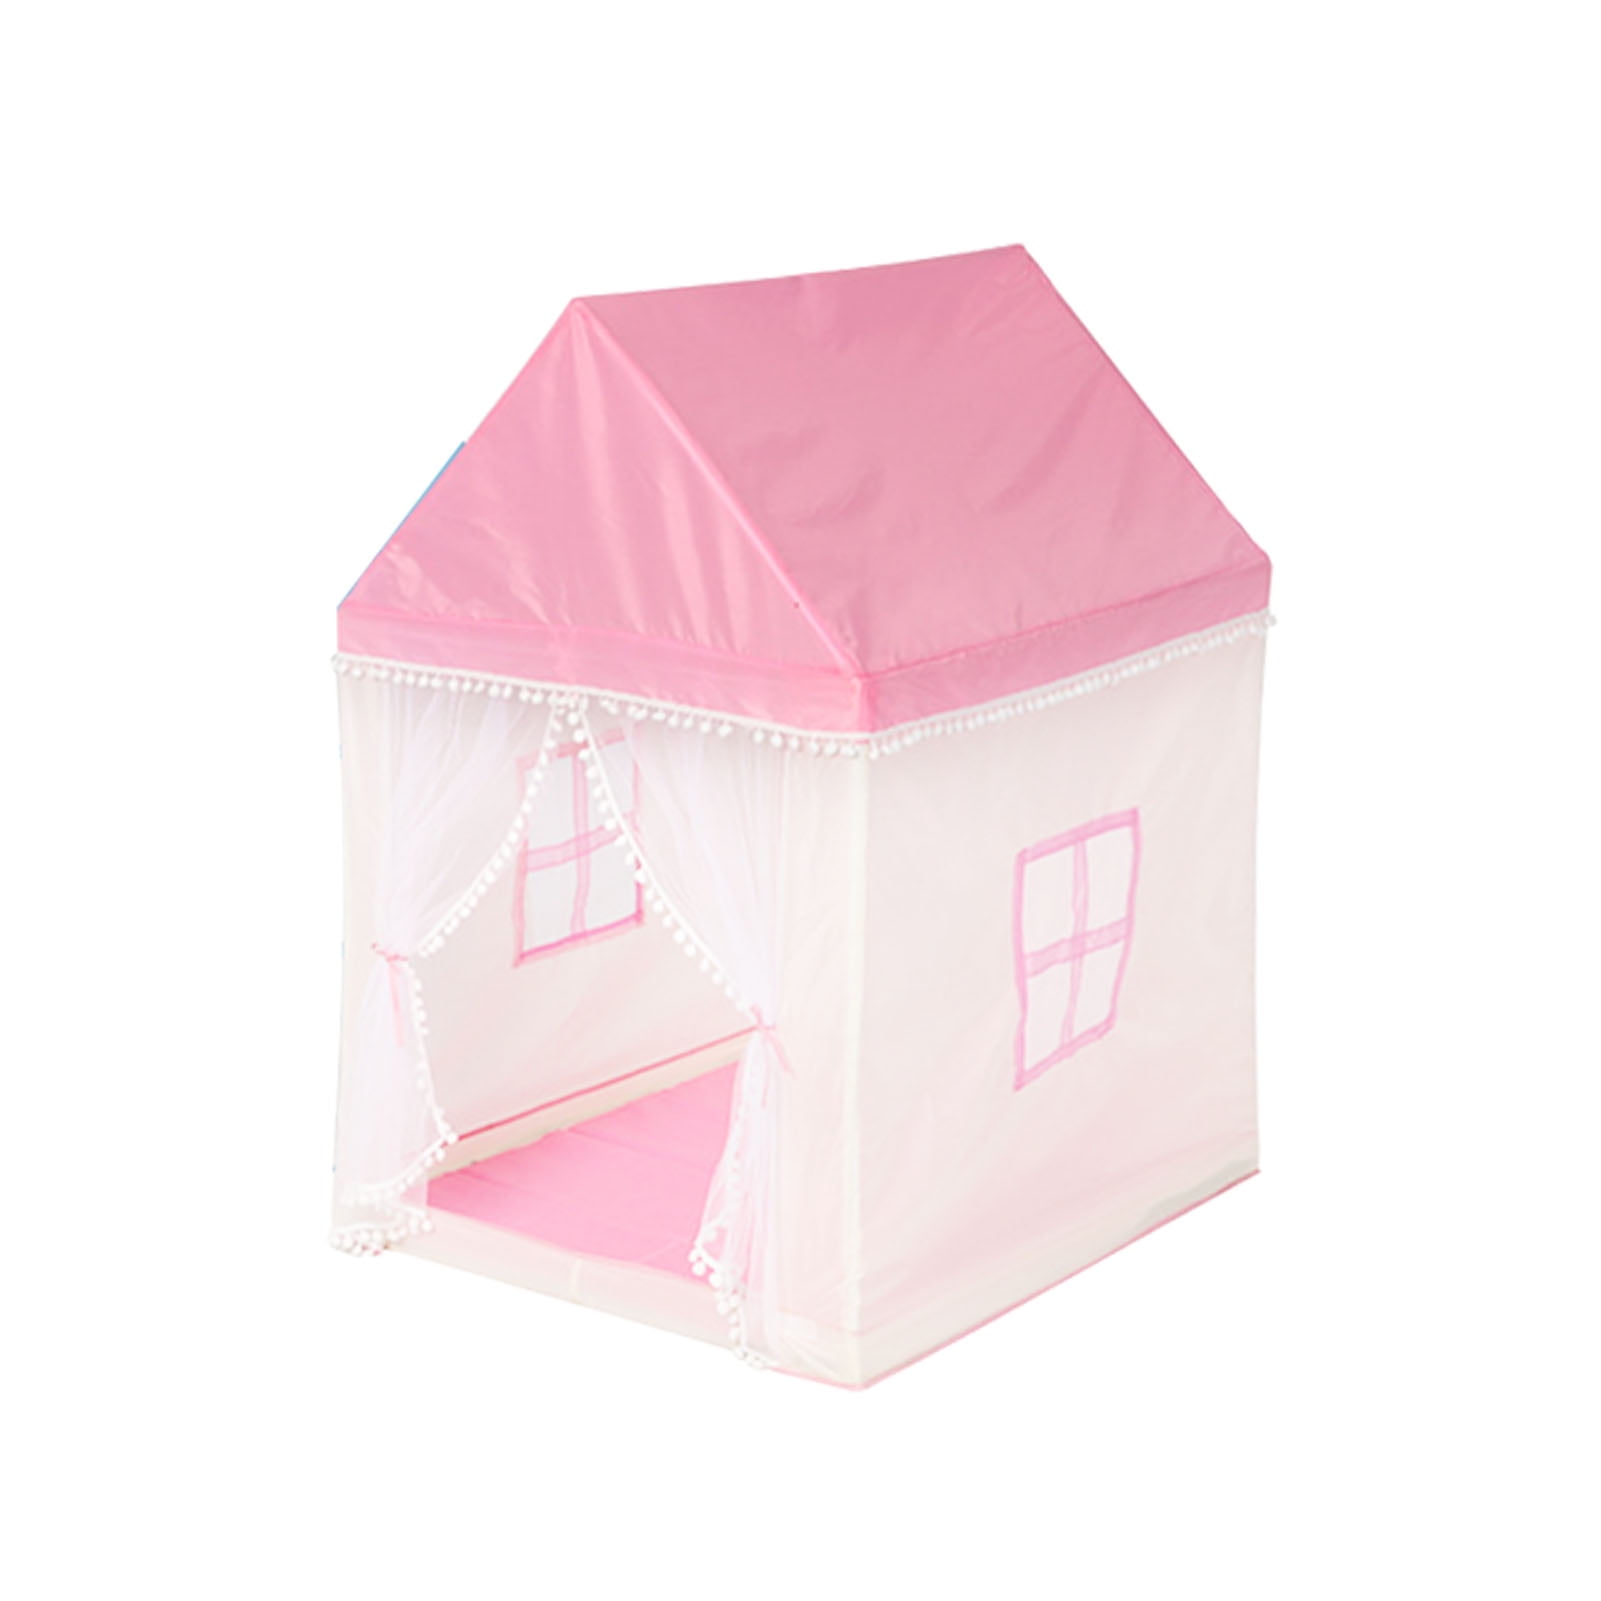 Girls Pop Up Tent Castle Playhouse Wendy House Pink Indoor Outdoor Princess Play 